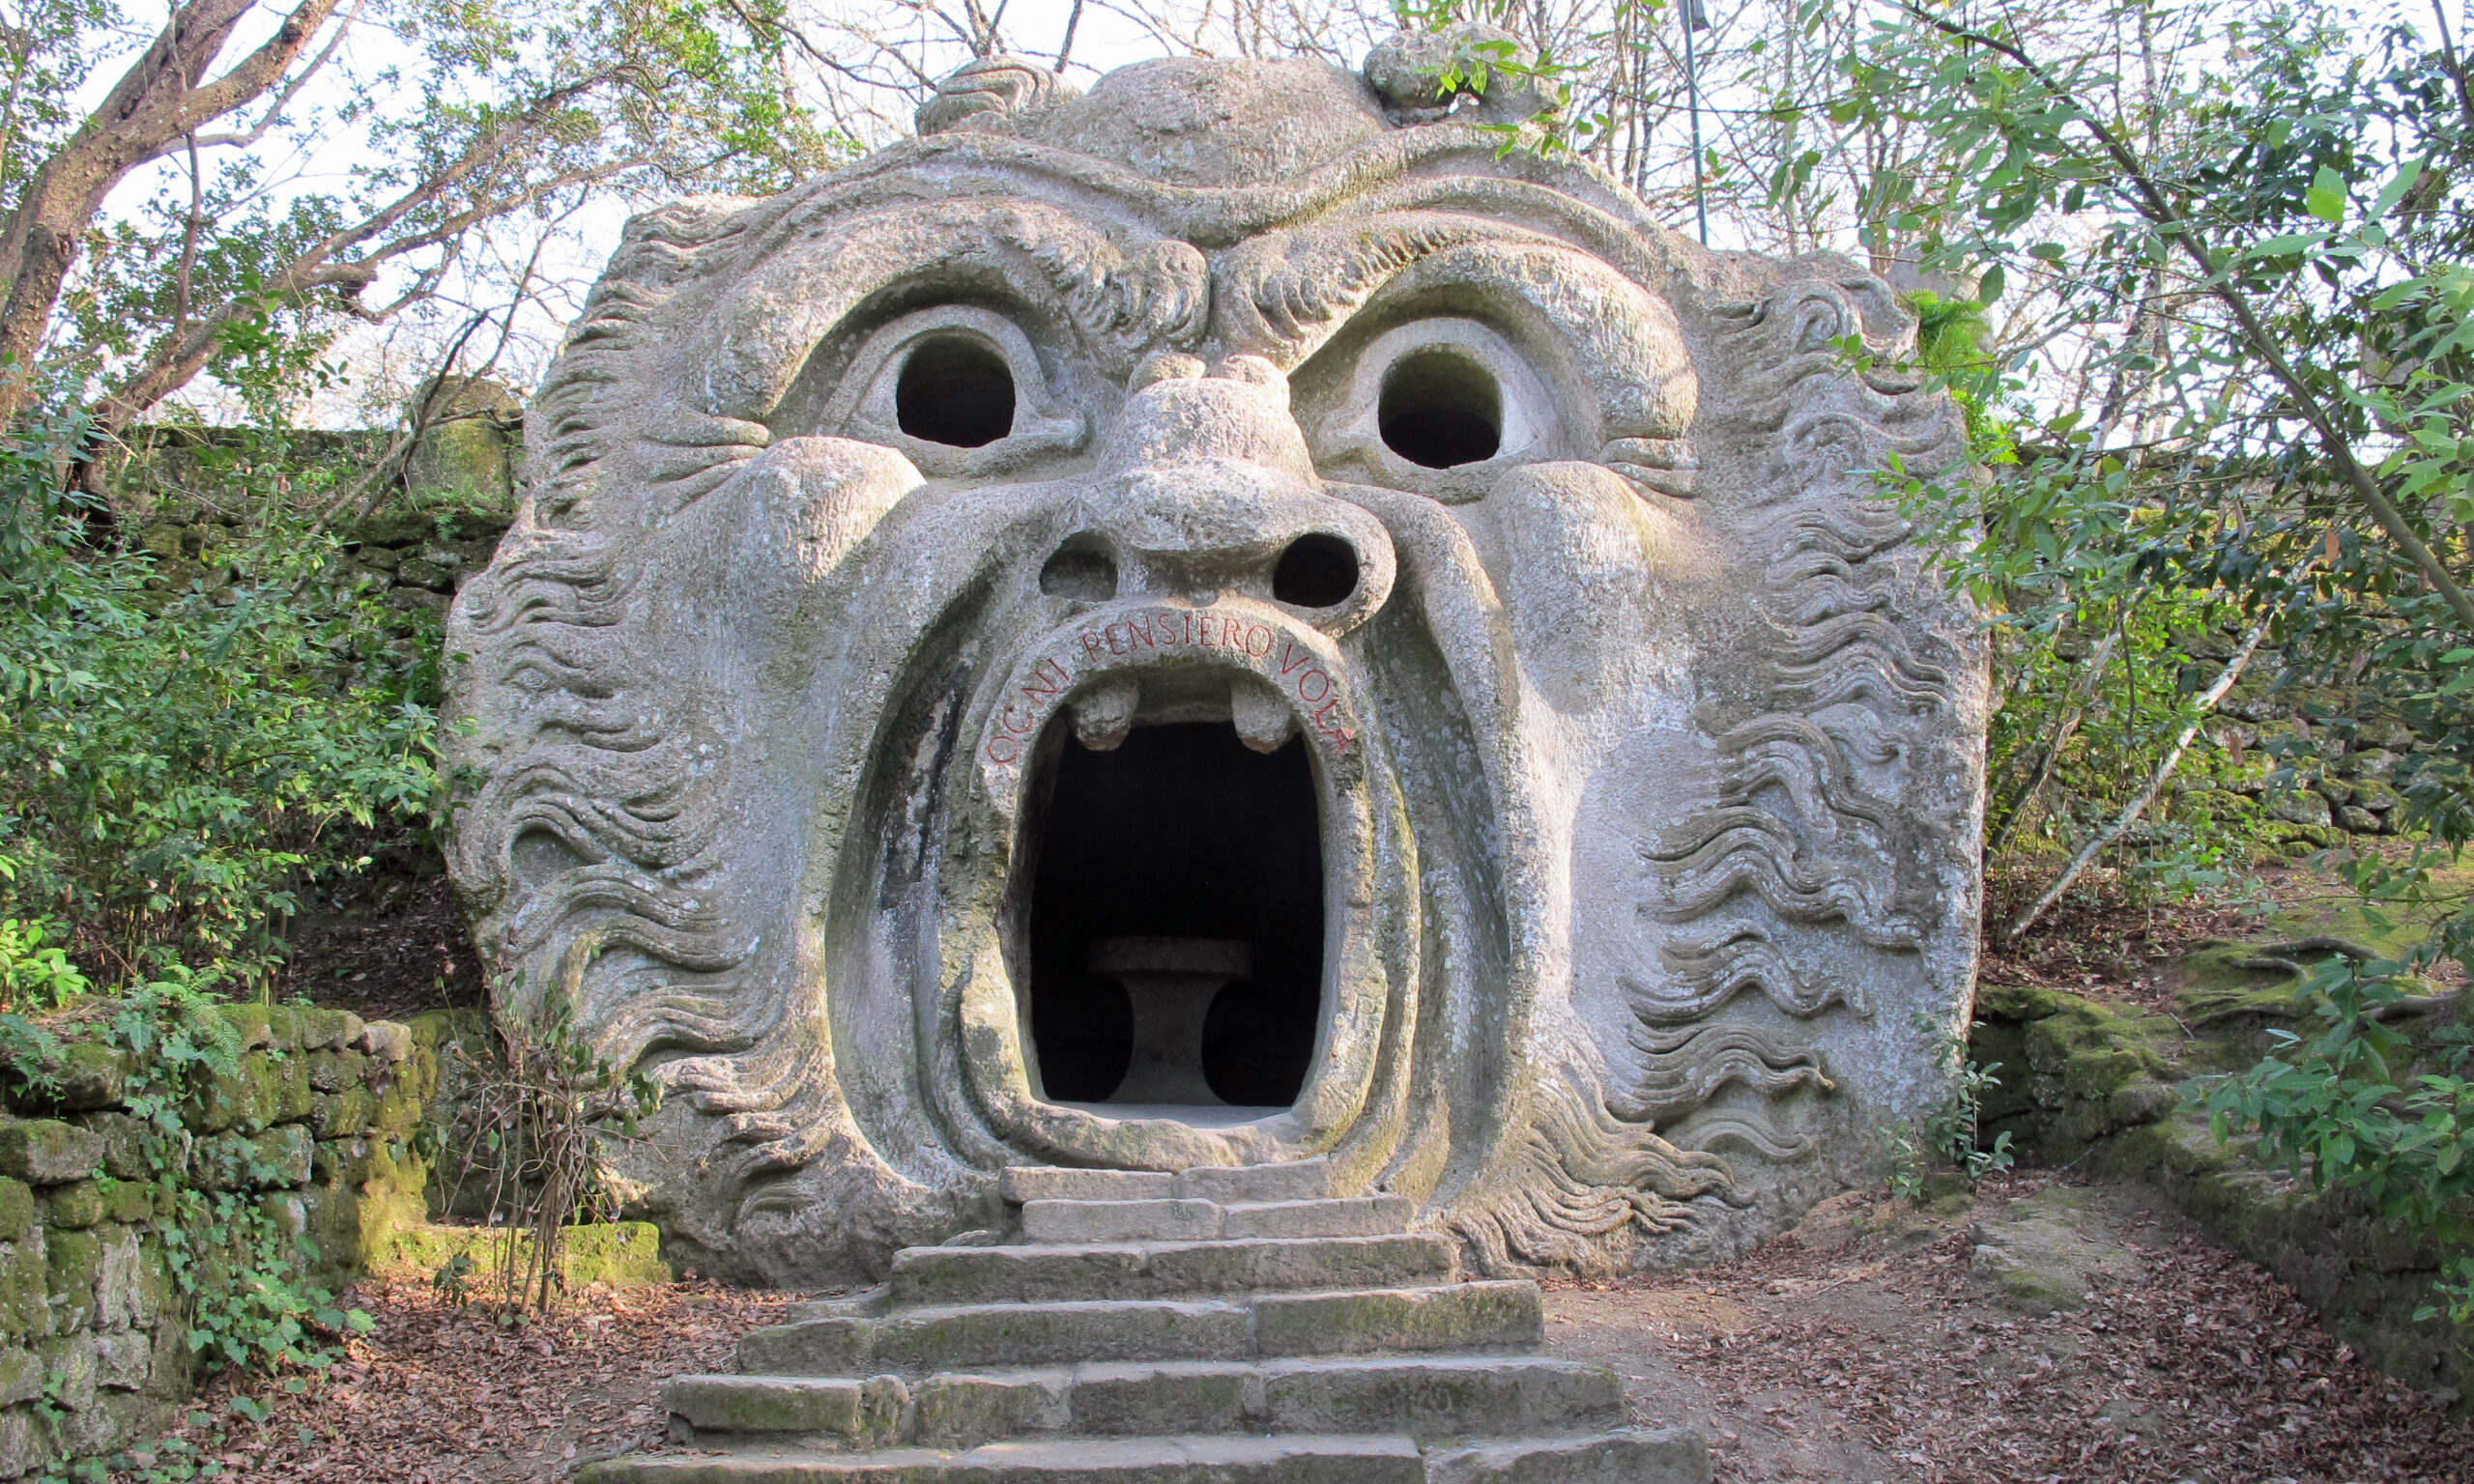 Steps leading up to a gray stone cave surrounded by greenery. The cave has a face carved into it with a large mouth over the entry way, eyes, and a nose.